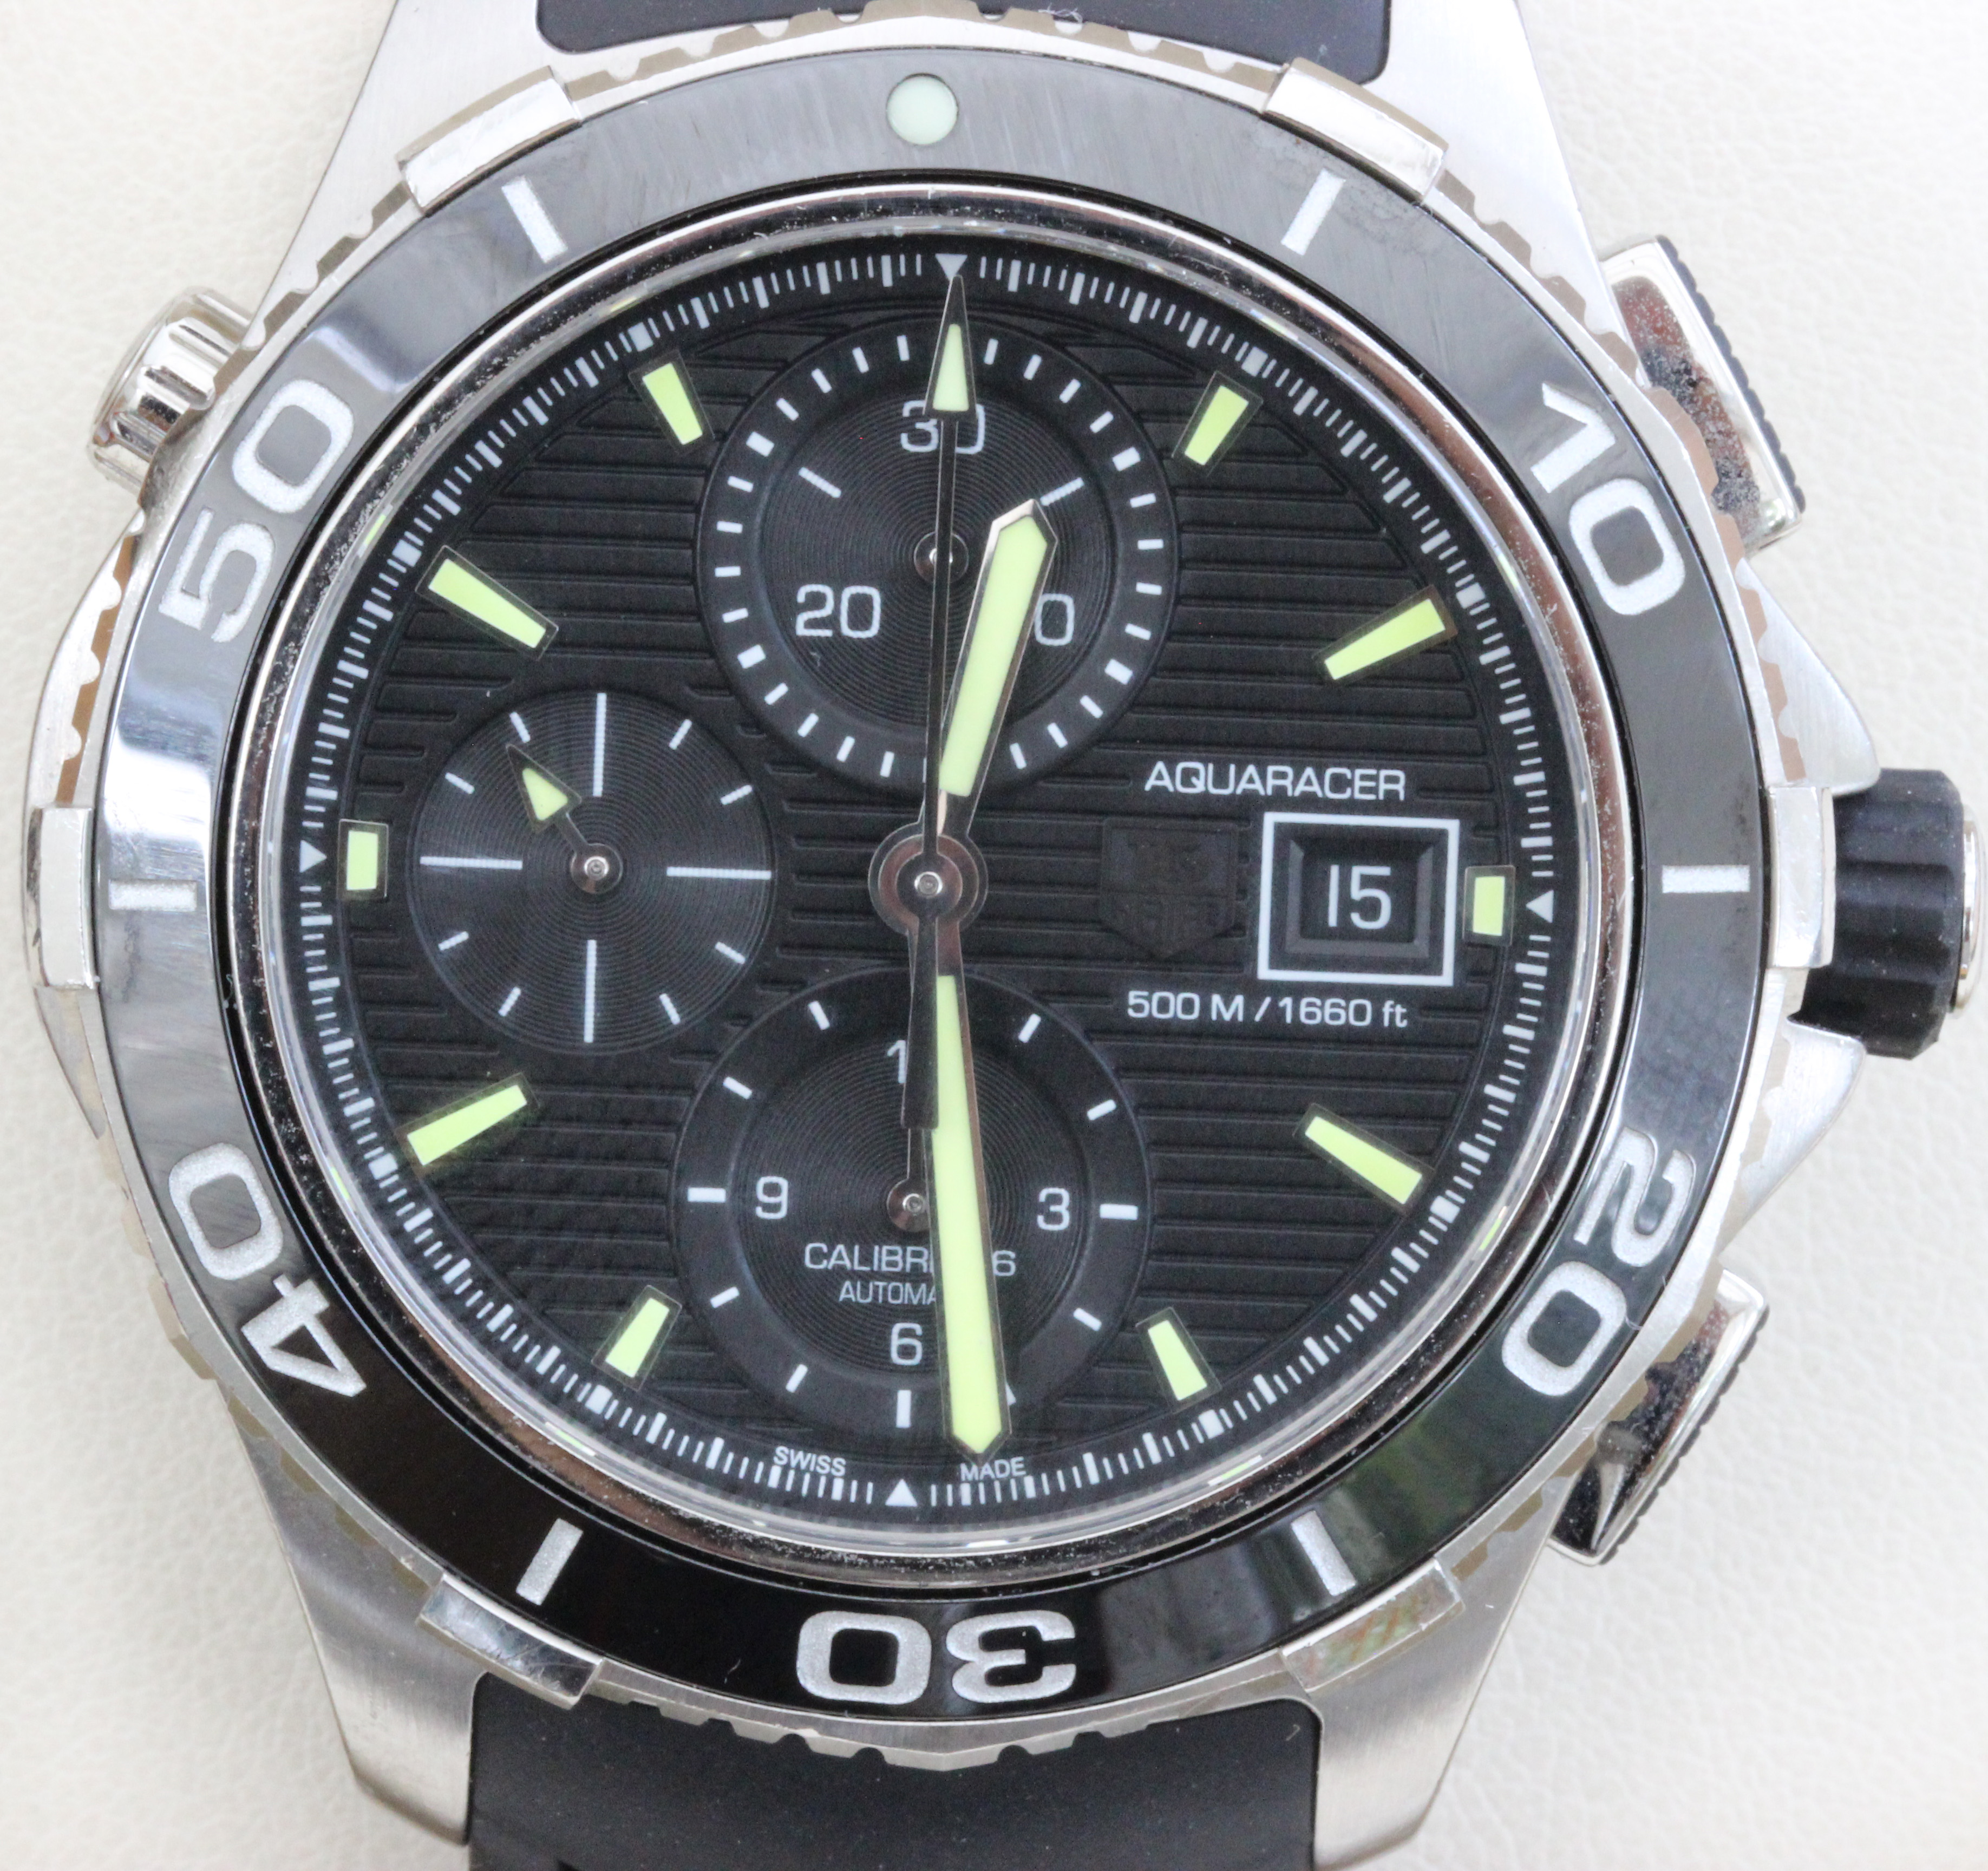 A Tag Heuer Aquaracer Calibre 16 automatic chronograph 500m, water resistant to 500m, helium valve - Image 2 of 8